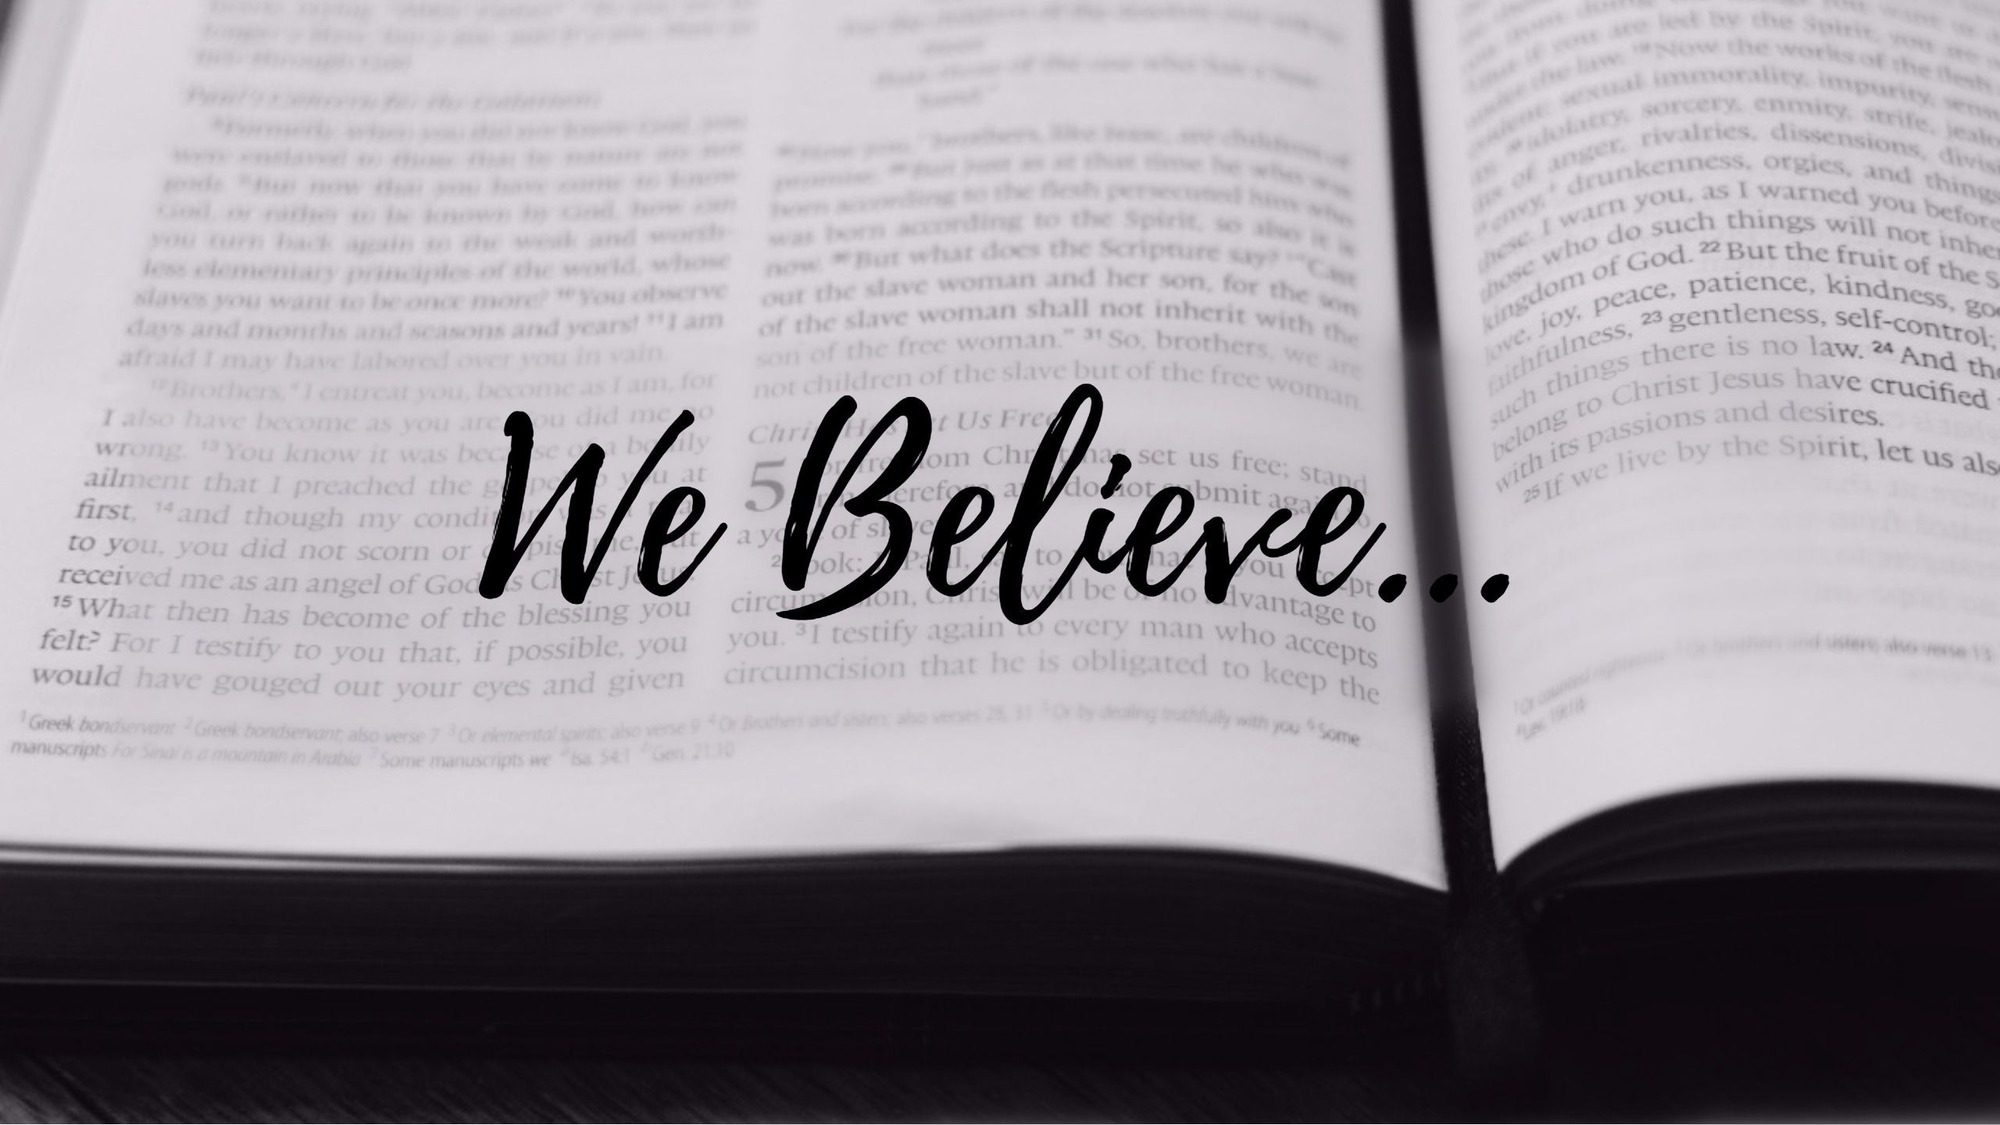 Learn More About What We Believe